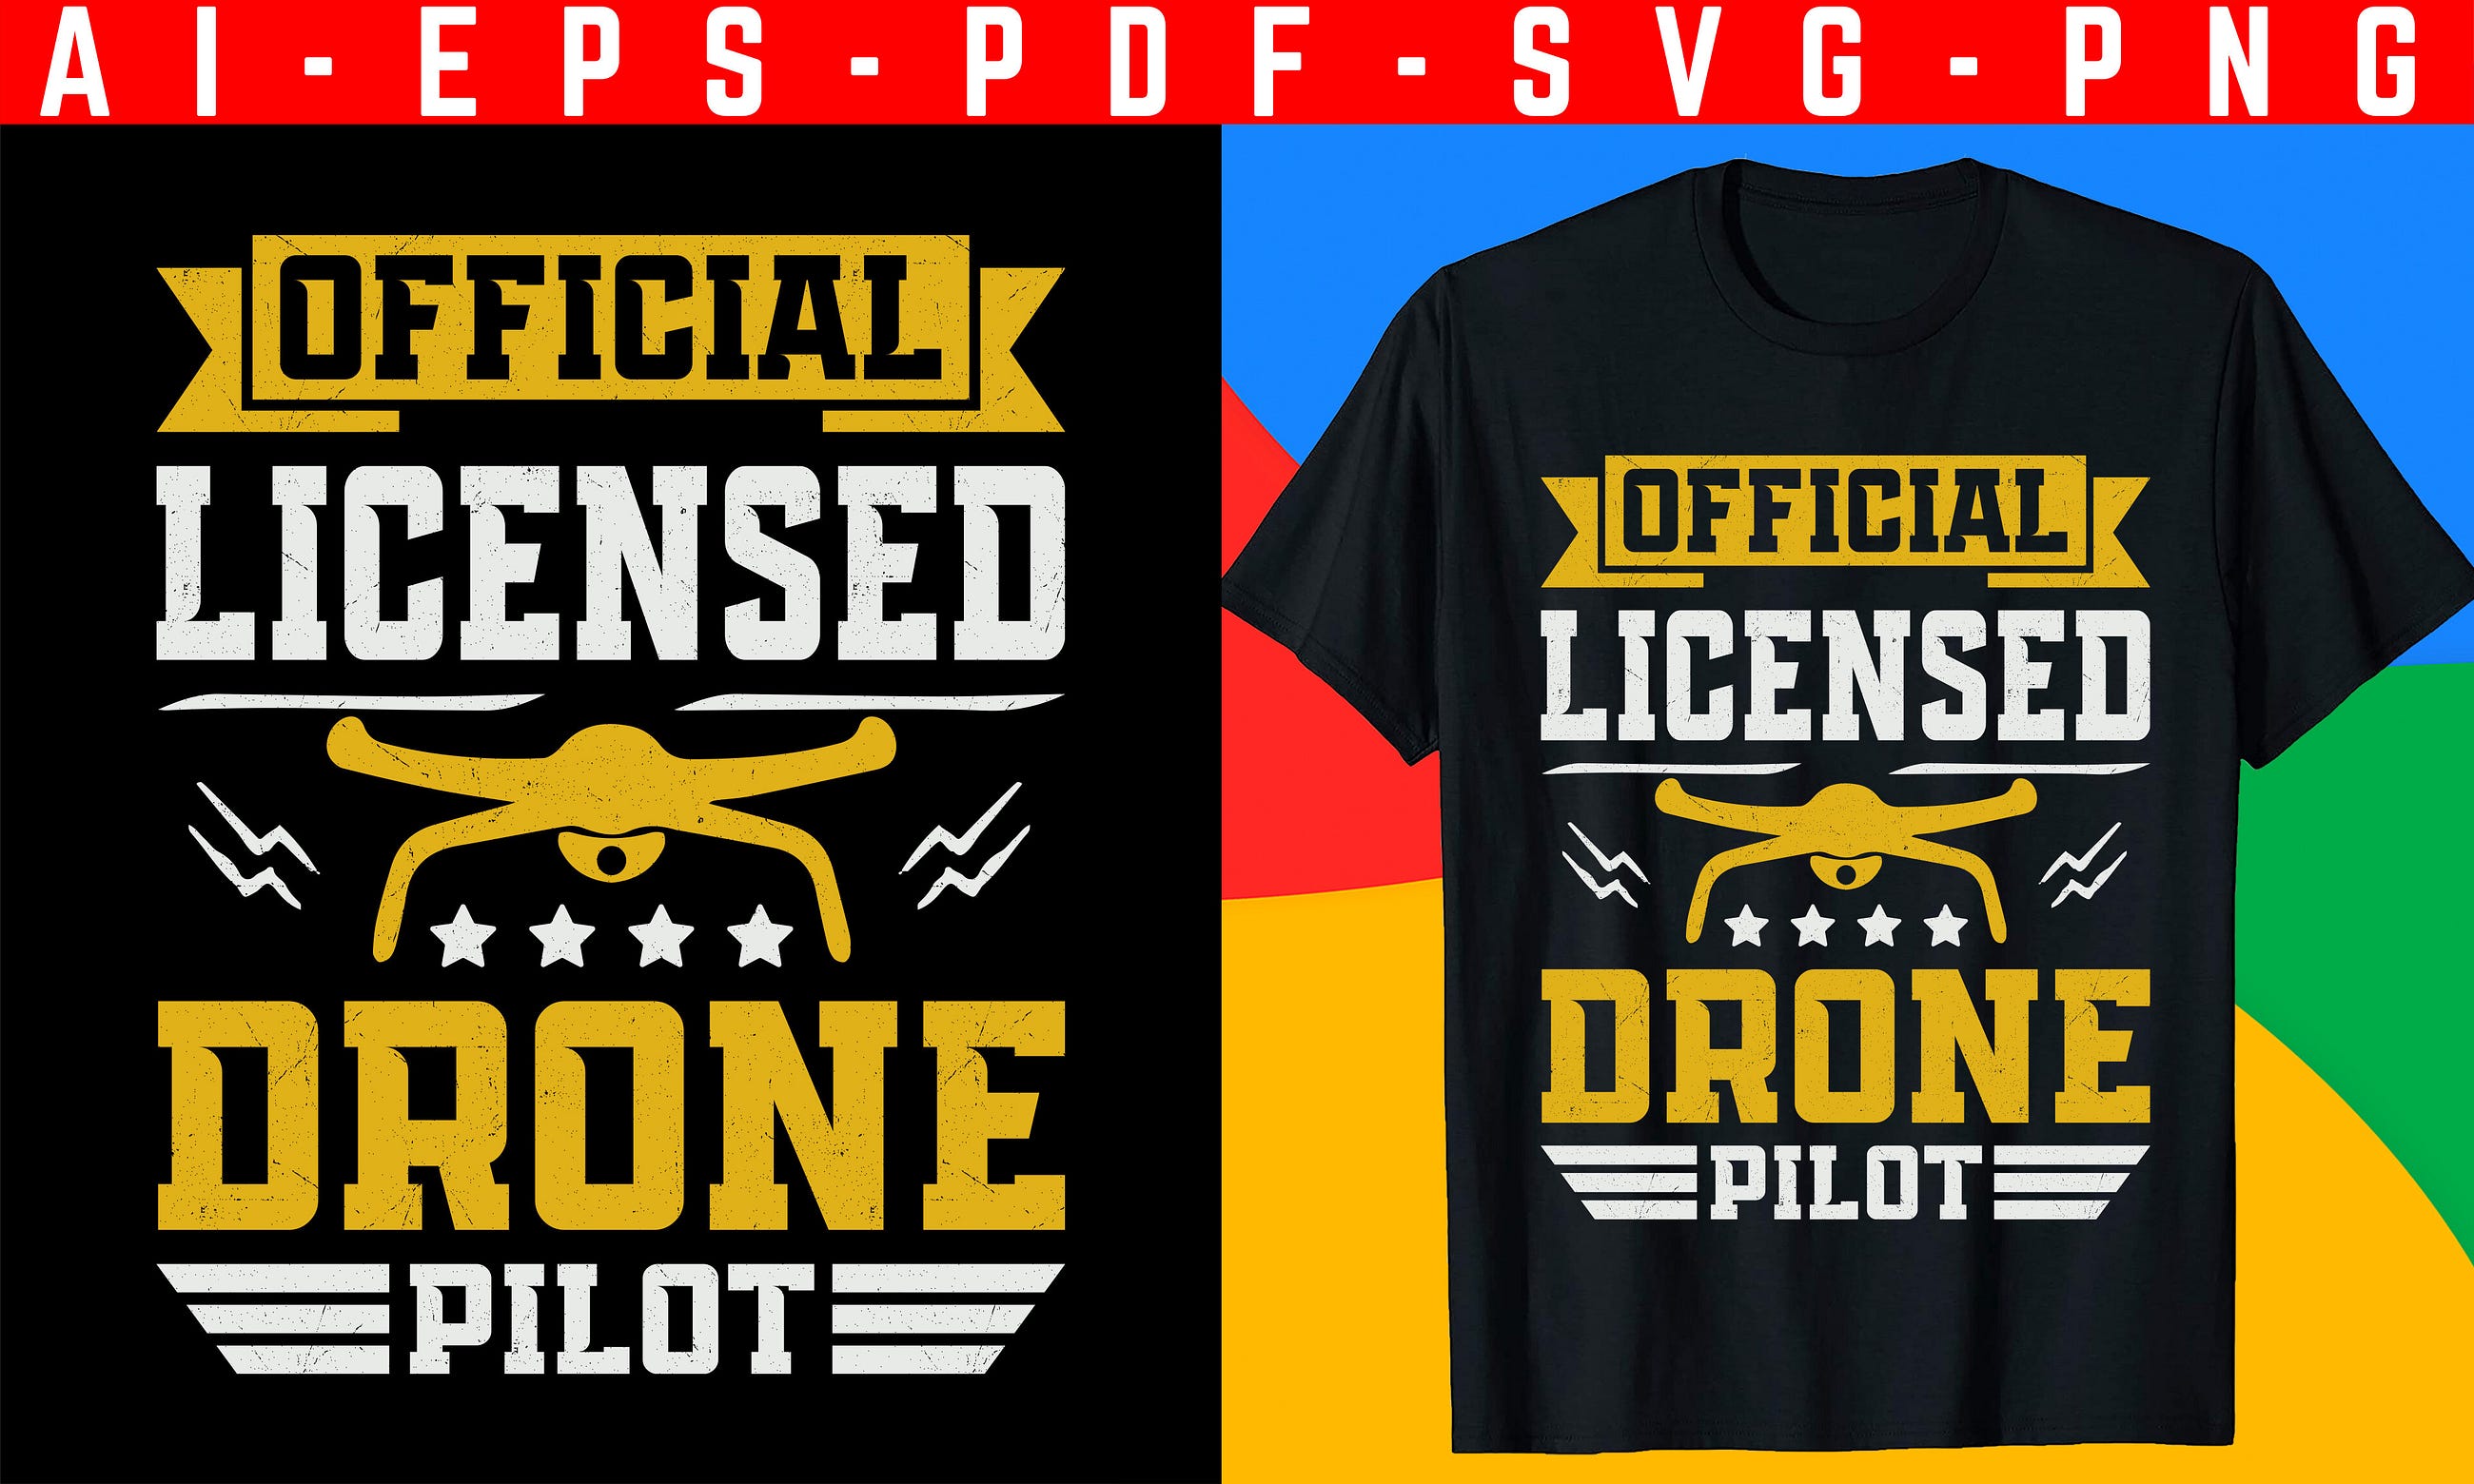 Official Licensed Drone Pilot Graphic